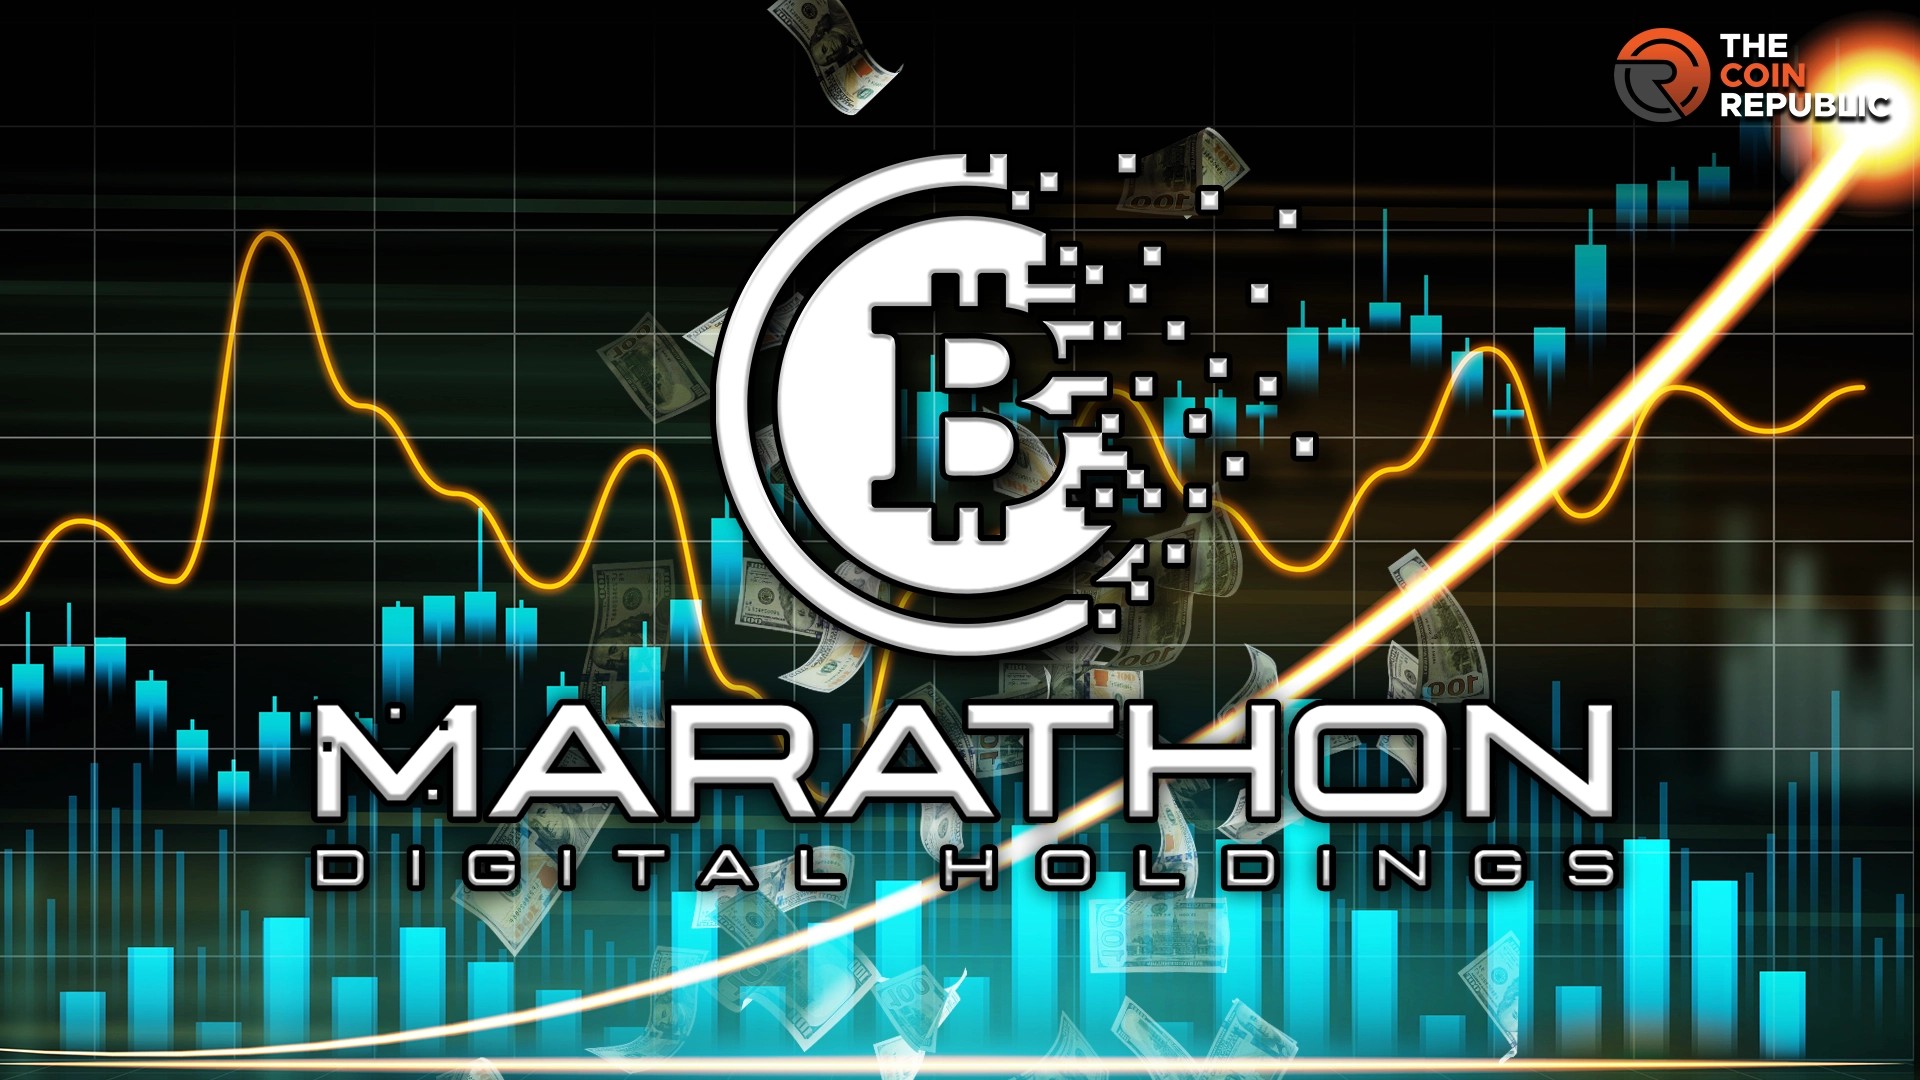 What Led To Increase In Marathon Digital’s Stock Prices By 18%?